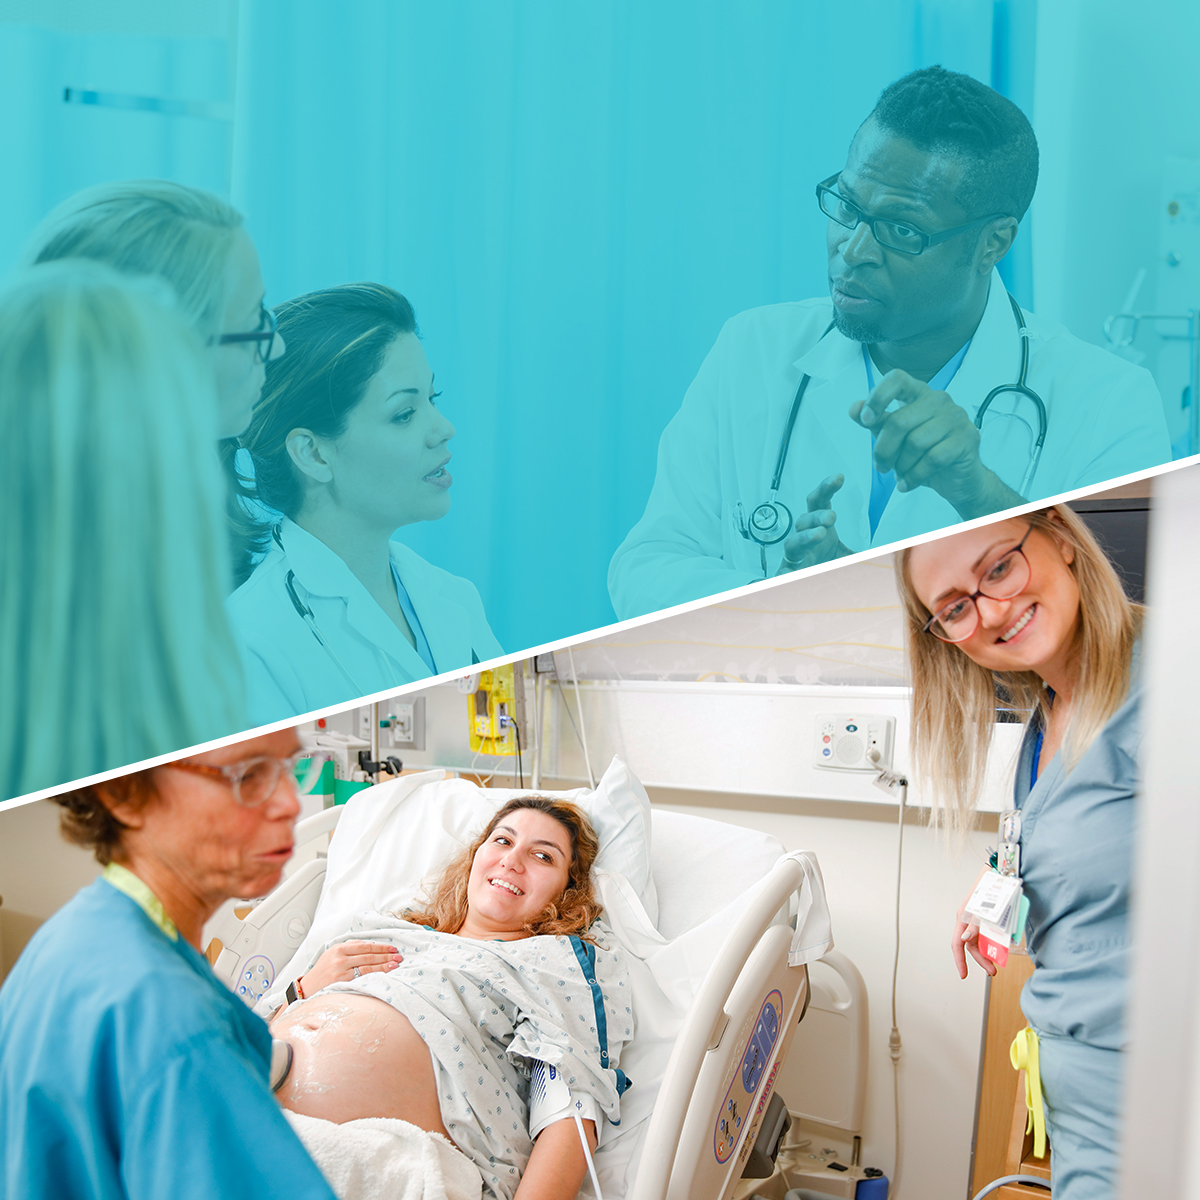 Split banner image showing two scenes of pre-med students shadowing a doctor.